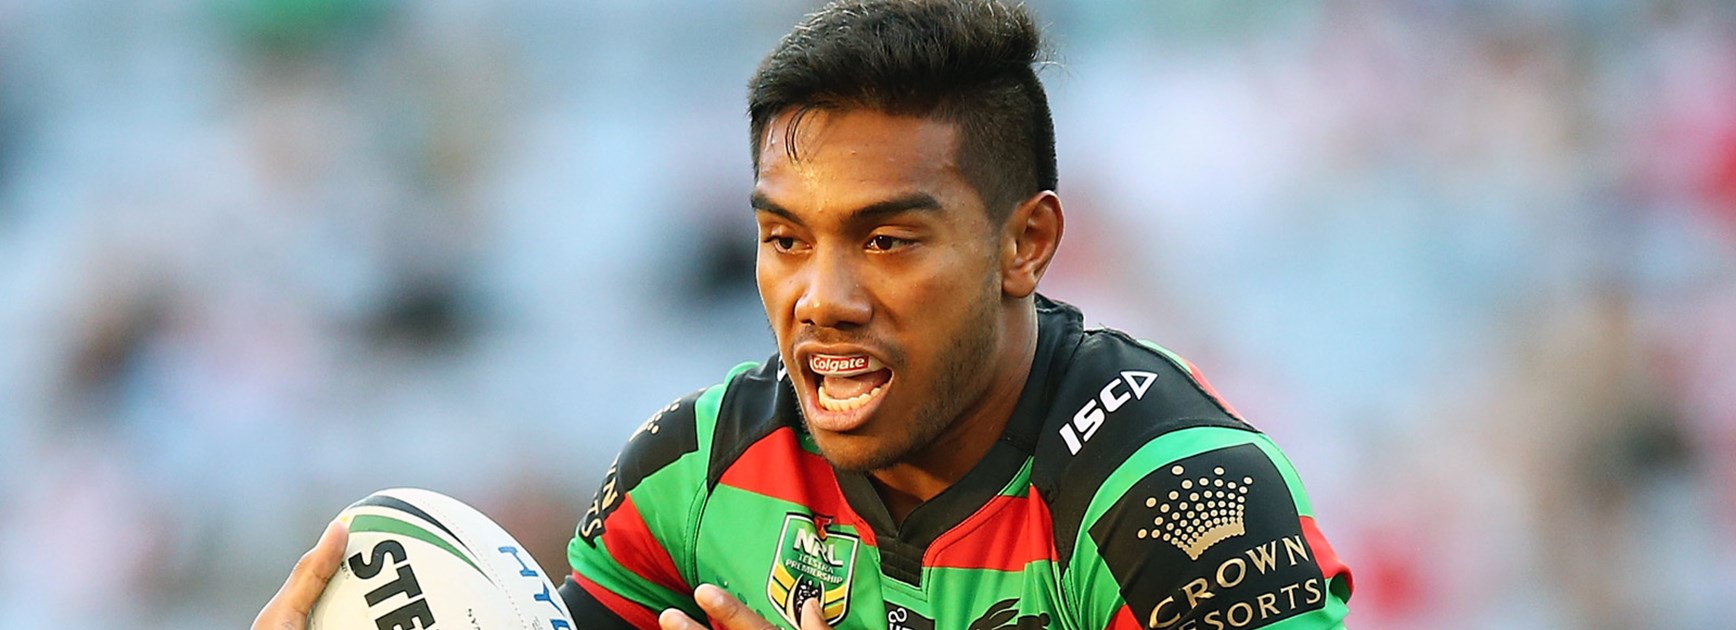 Souths recruit Hymel Hunt is in line to make his Rabbitohs debut in Round 1 against the Roosters.